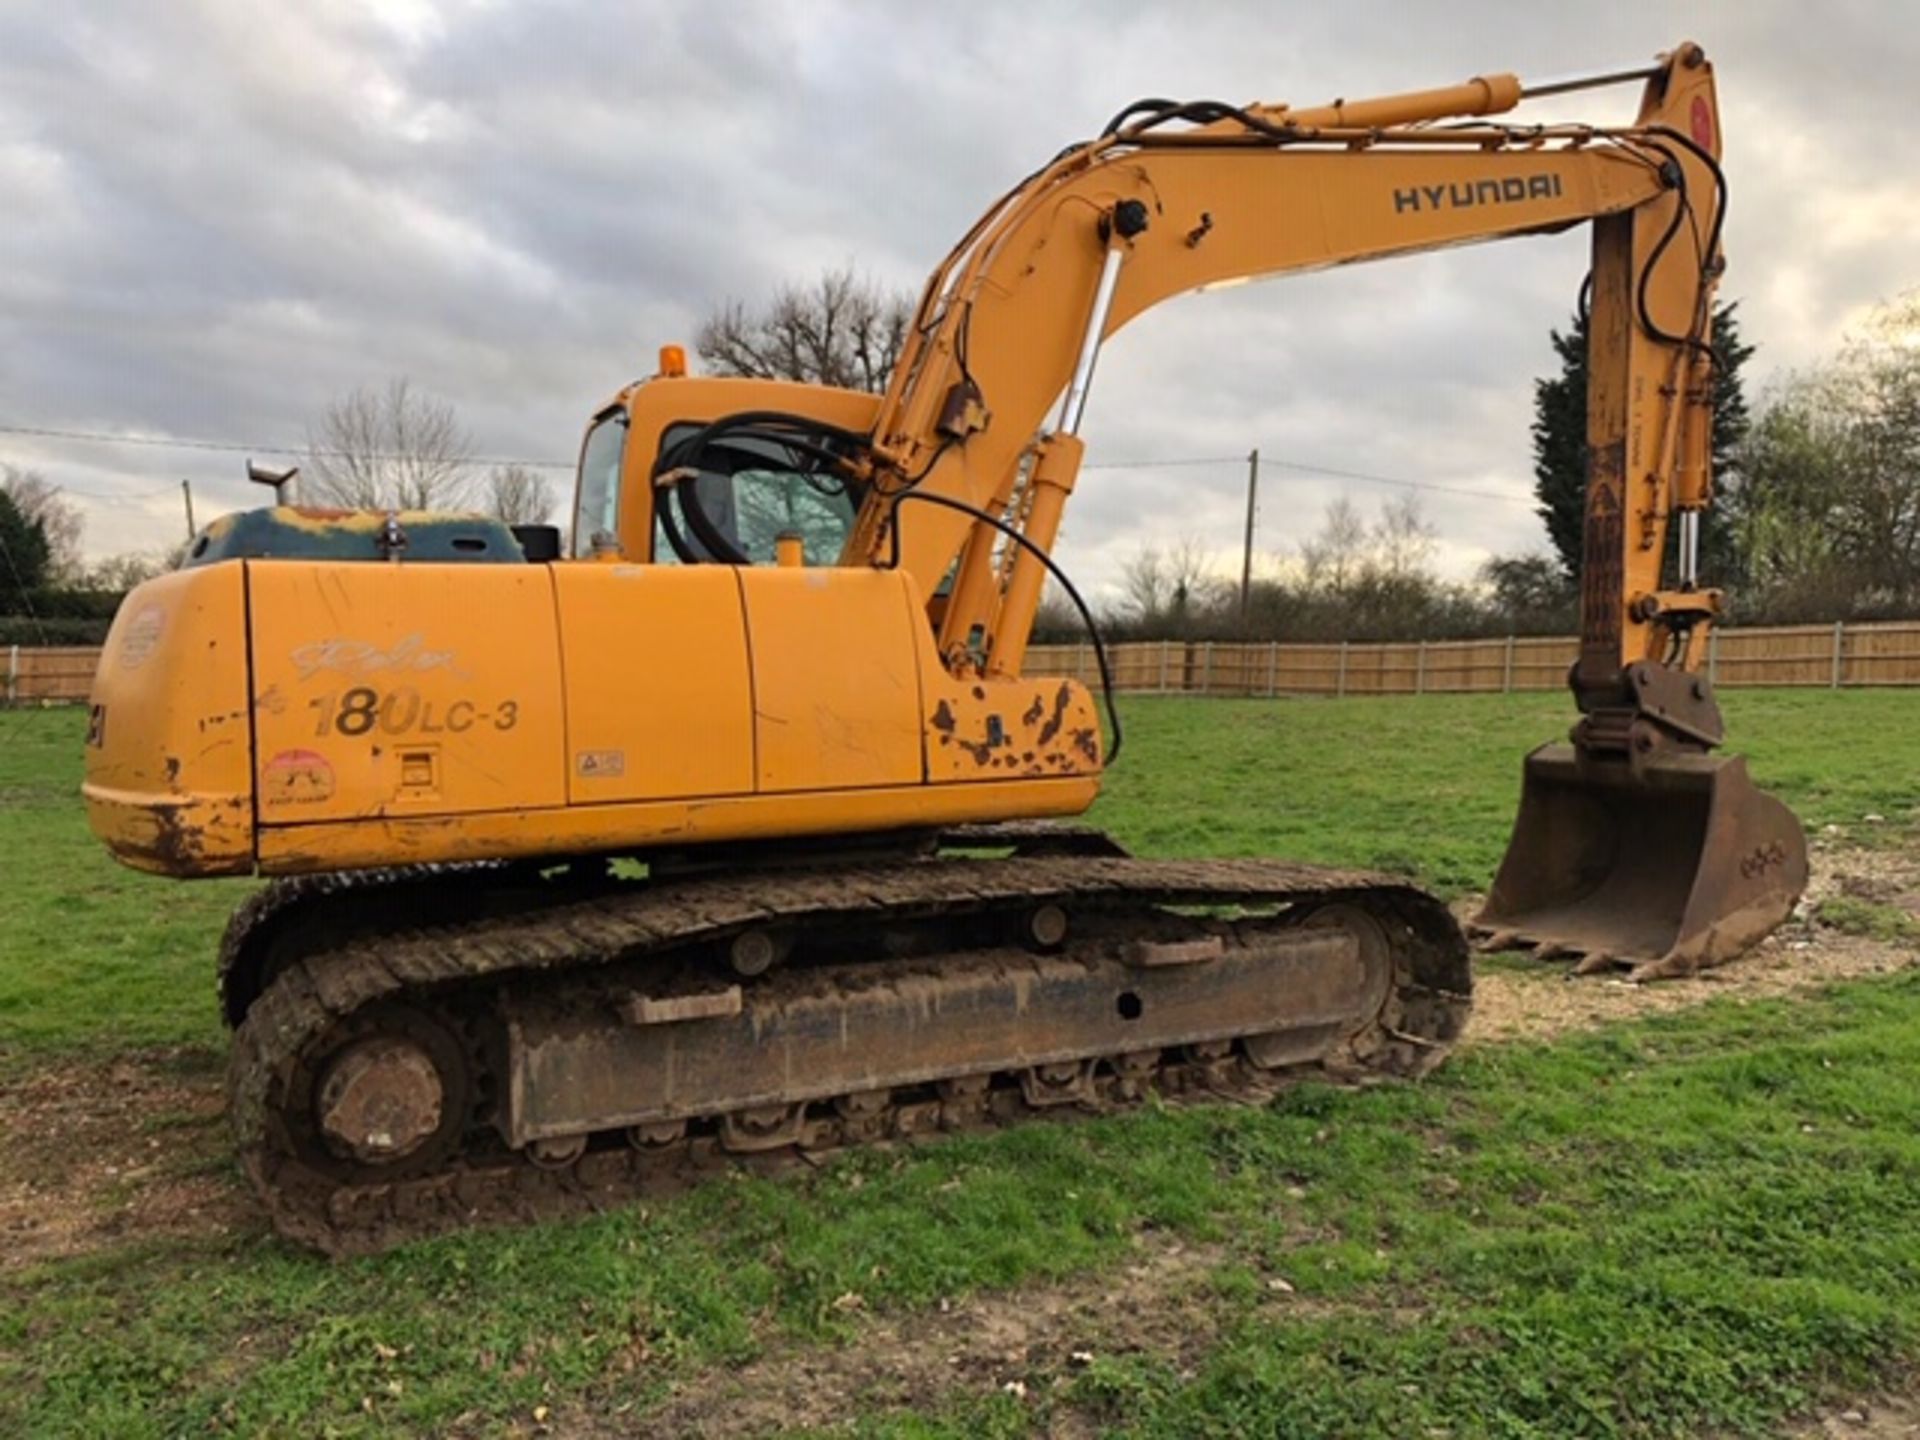 HYUNDAI 180 LC-3 ROBEX 18 TONNE EXCAVATOR. YEAR 1998 APPROX. WHEN TESTED WAS SEEN TO DRIVE, SLEW, AN